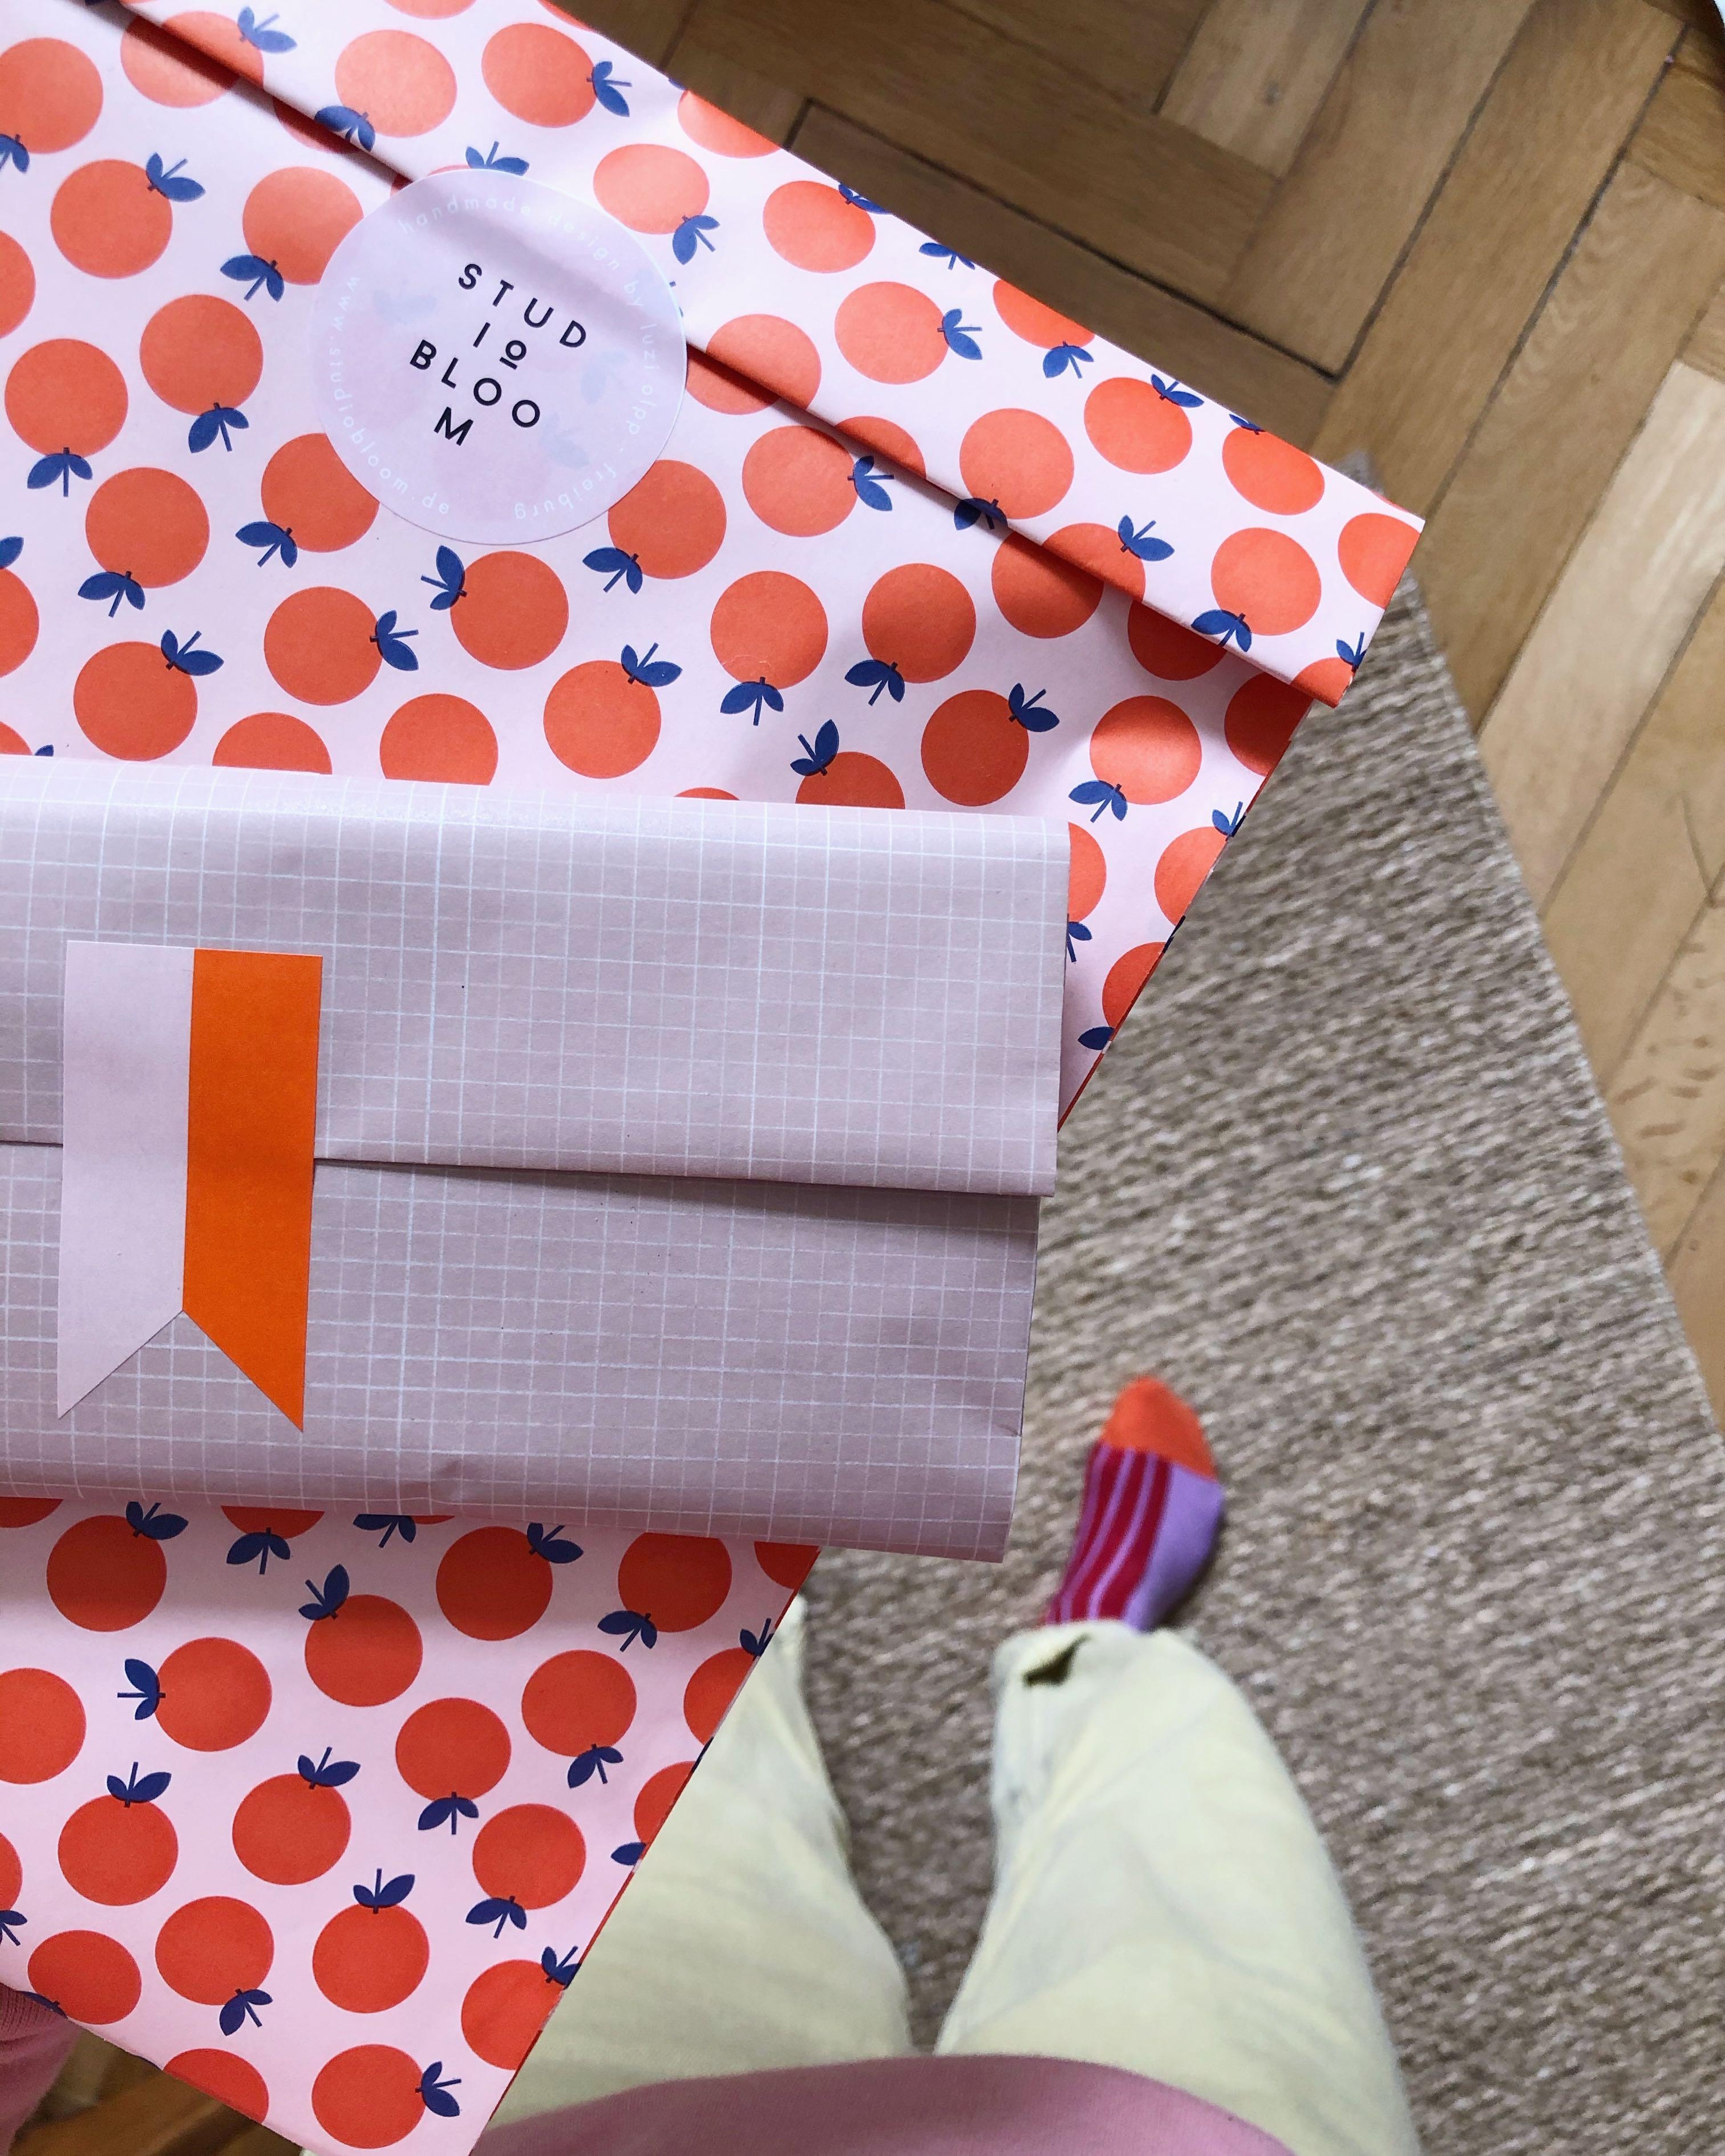 #wrapping #clementine #gift #paperlove @Studiobloom_design